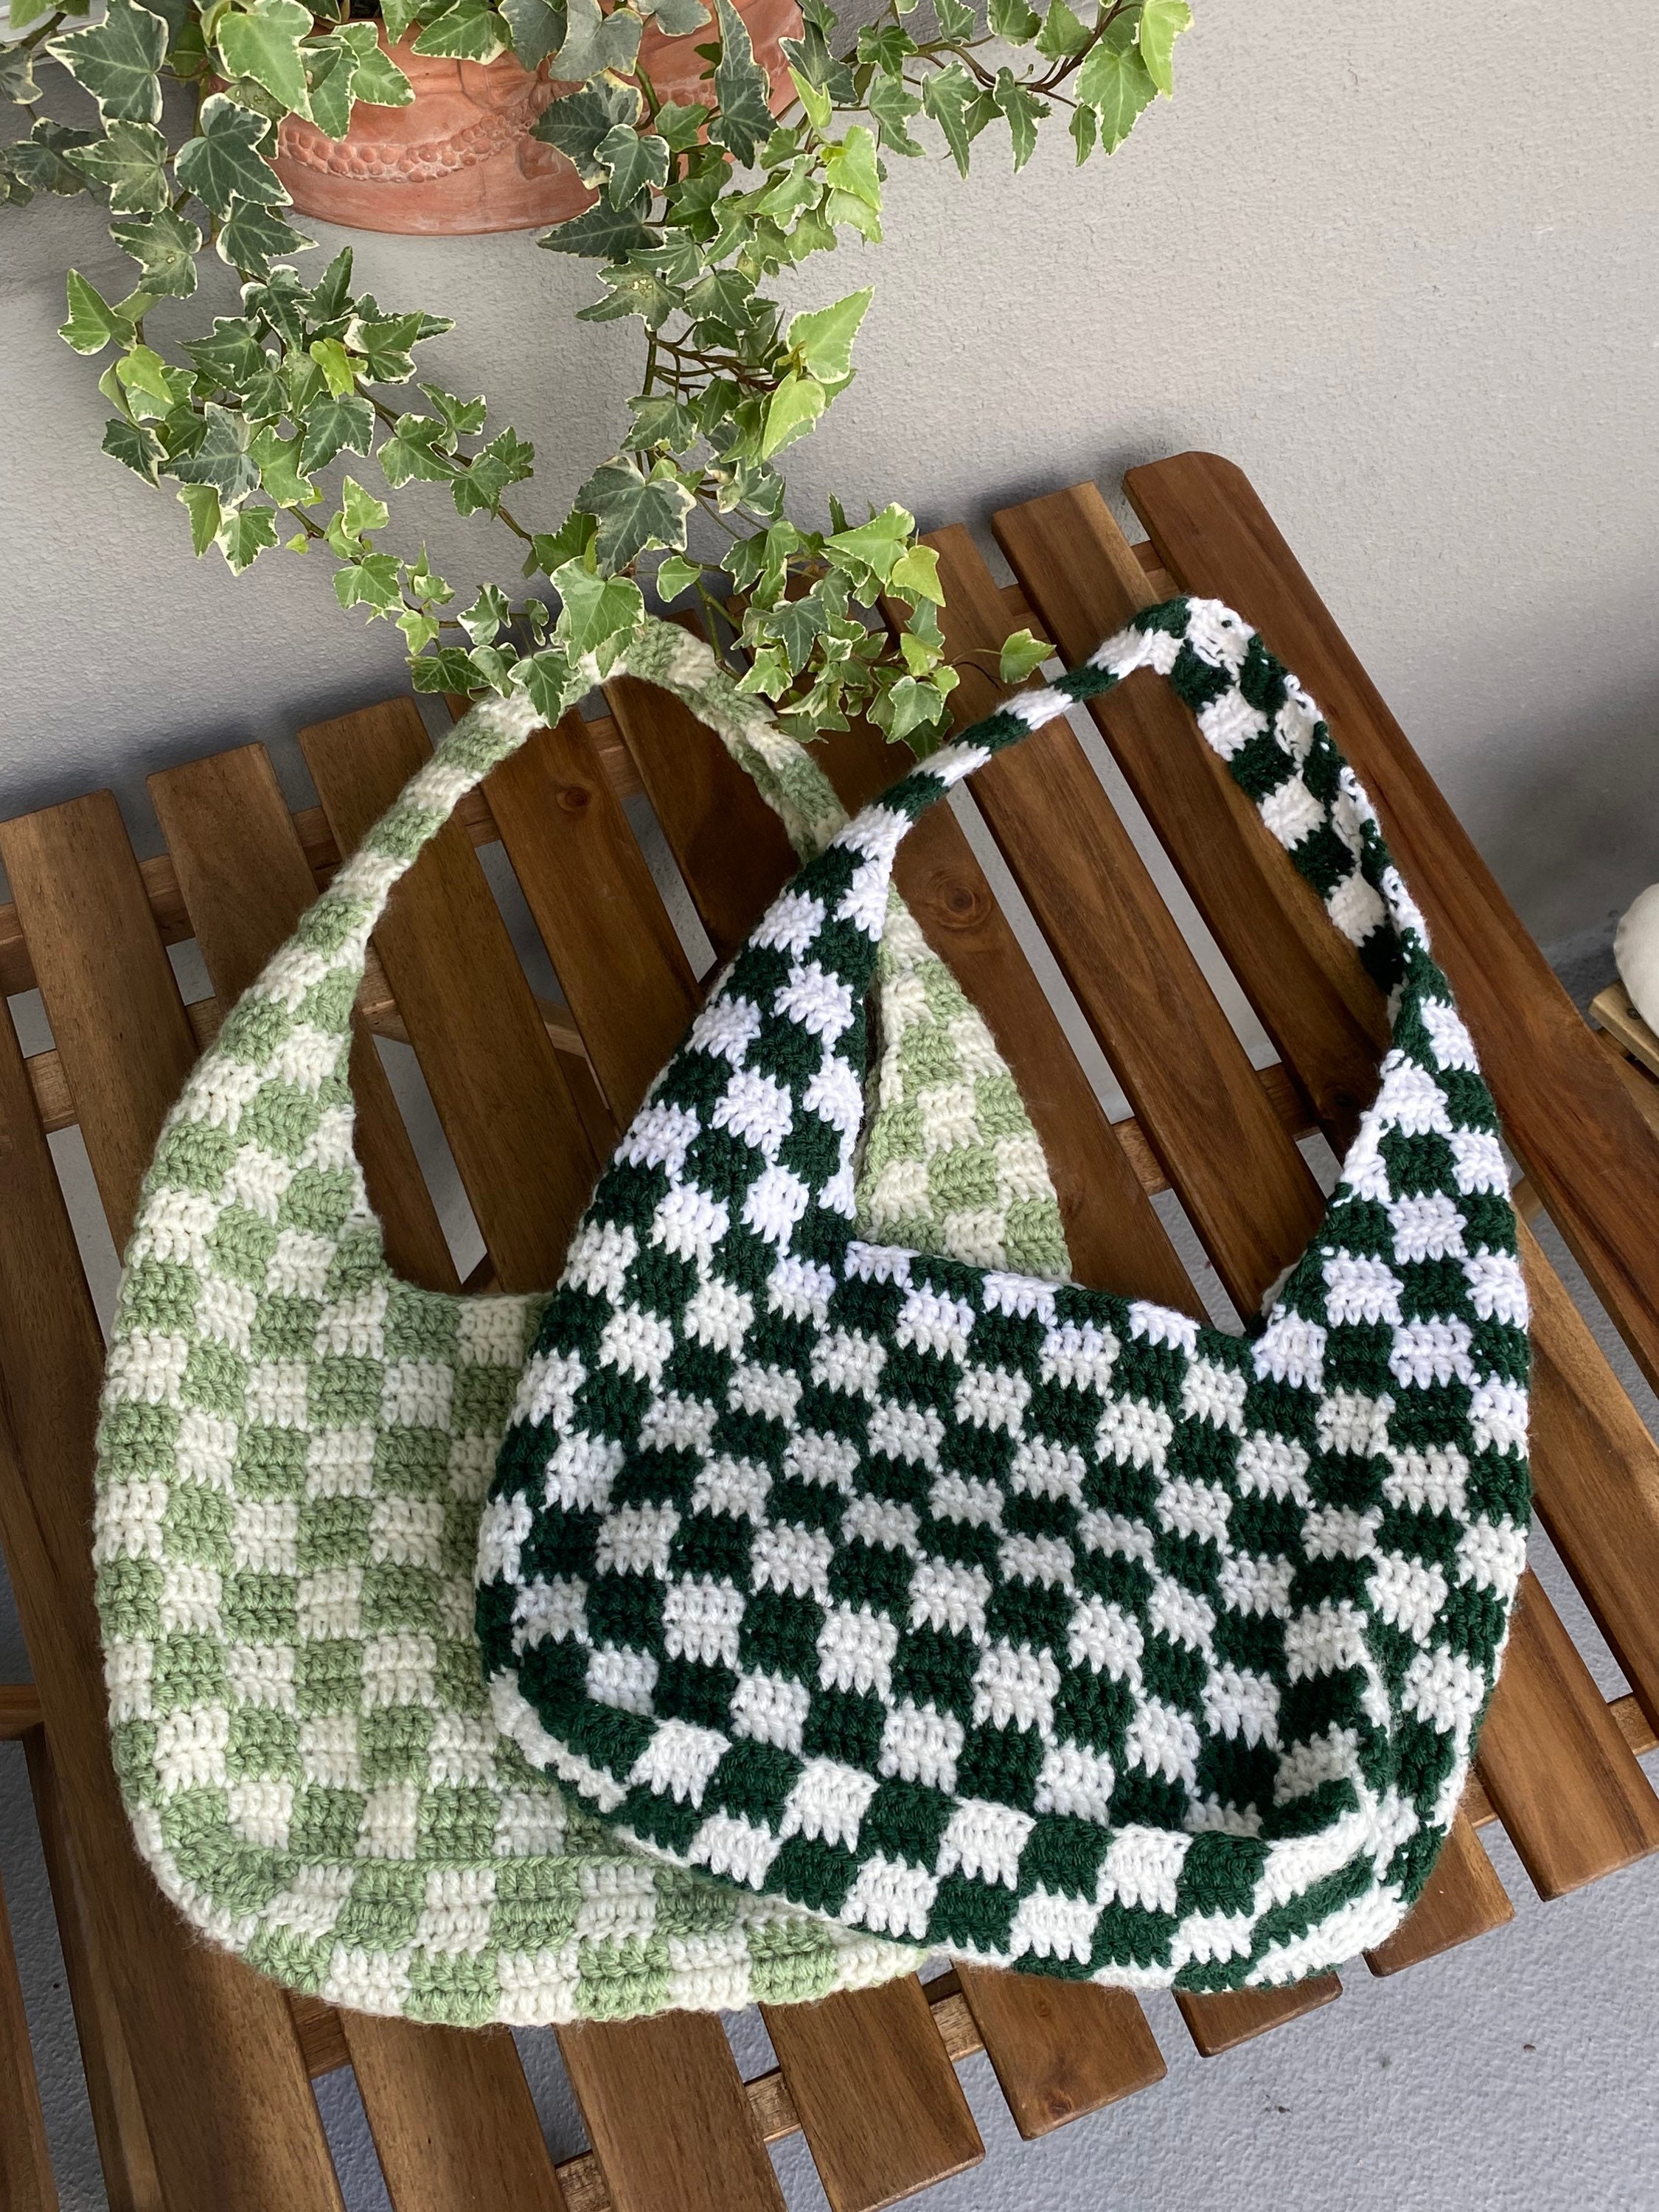 Casual Panelled Plaid Crochet Tote Bag Knitted Women Shoulder Bags